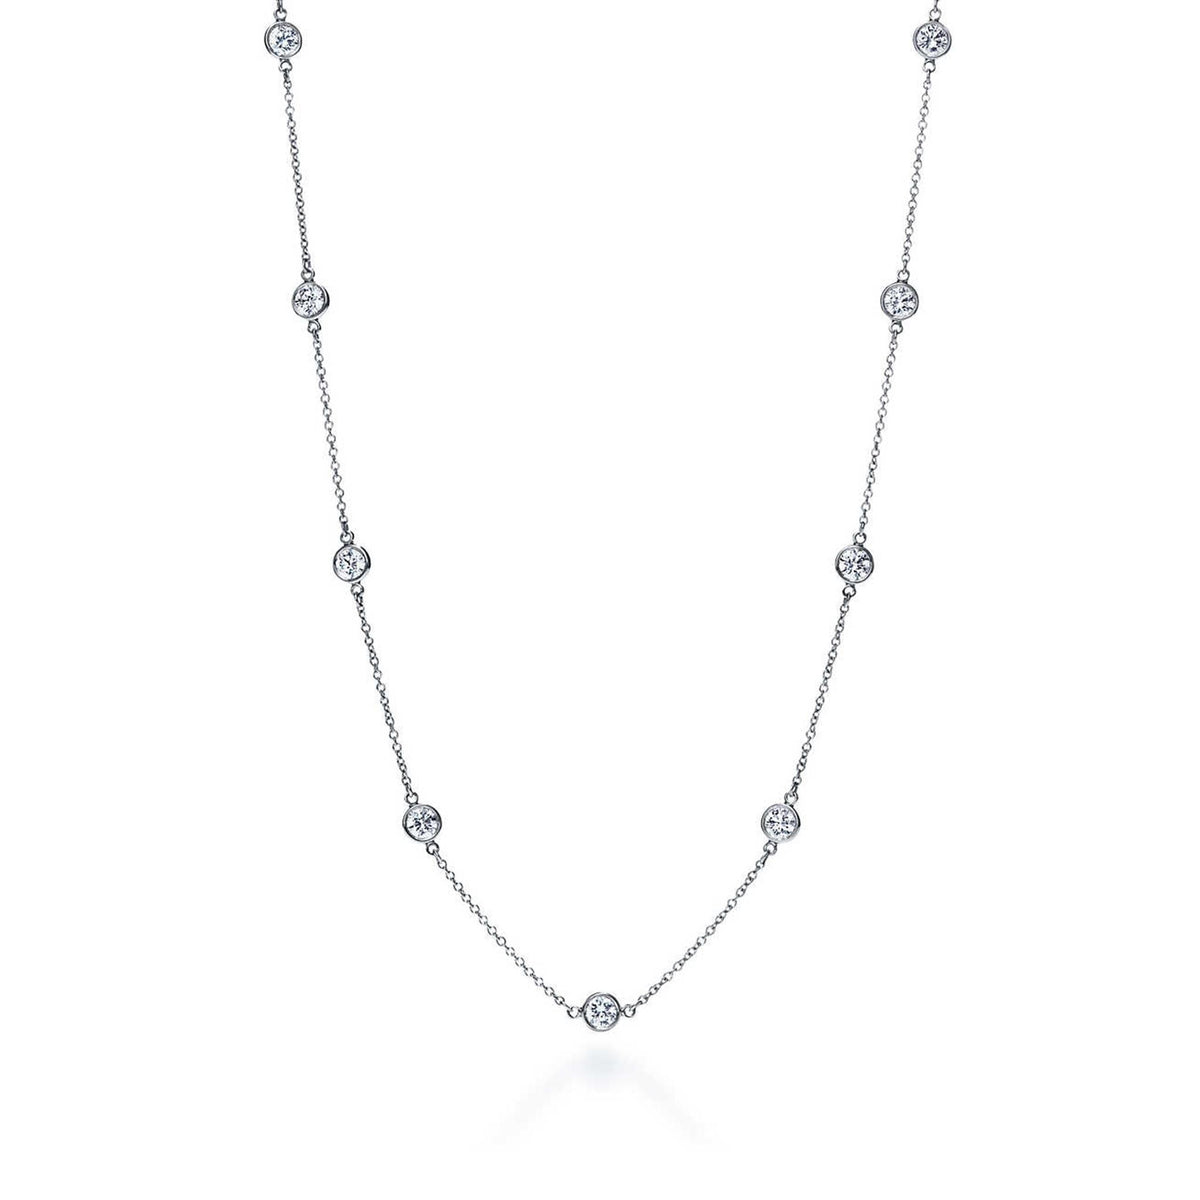 Milestone 14Kt White Gold Diamonds-By-The-Yard  Necklace With 3.00cttw Lab-Grown Diamonds